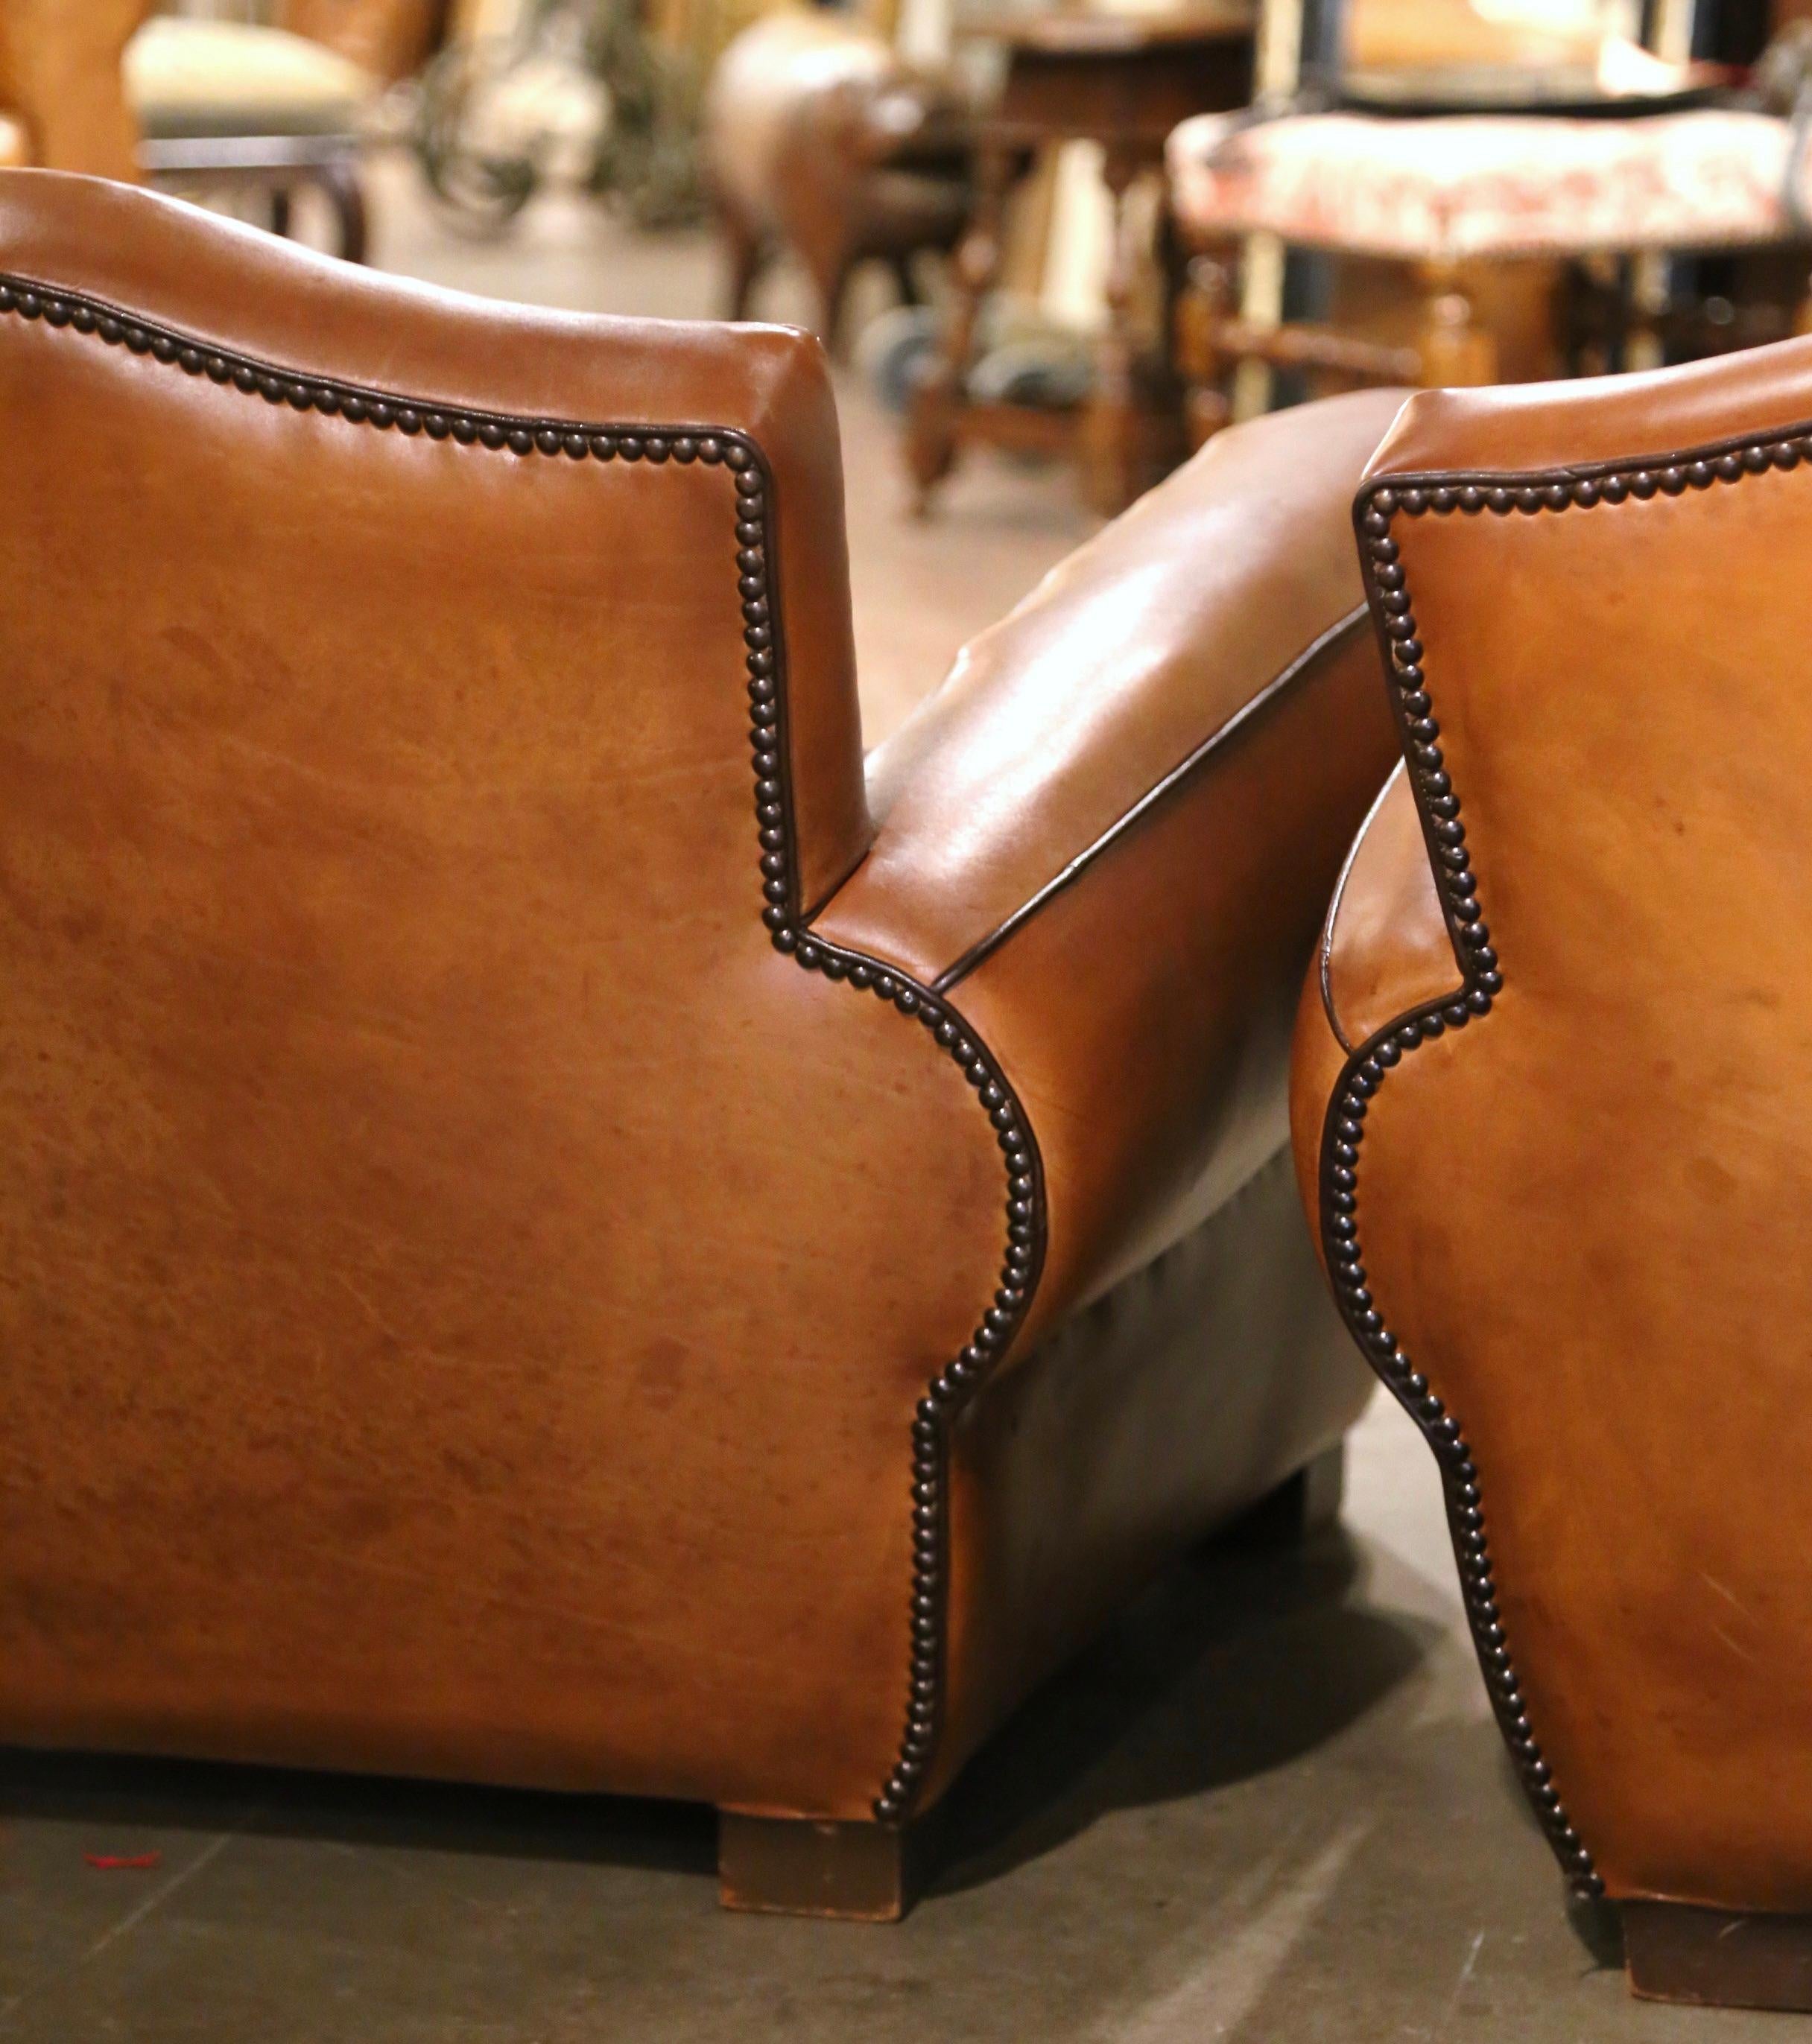 Pair of Early 20th Century French Club Armchairs with Original Brown Leather 3